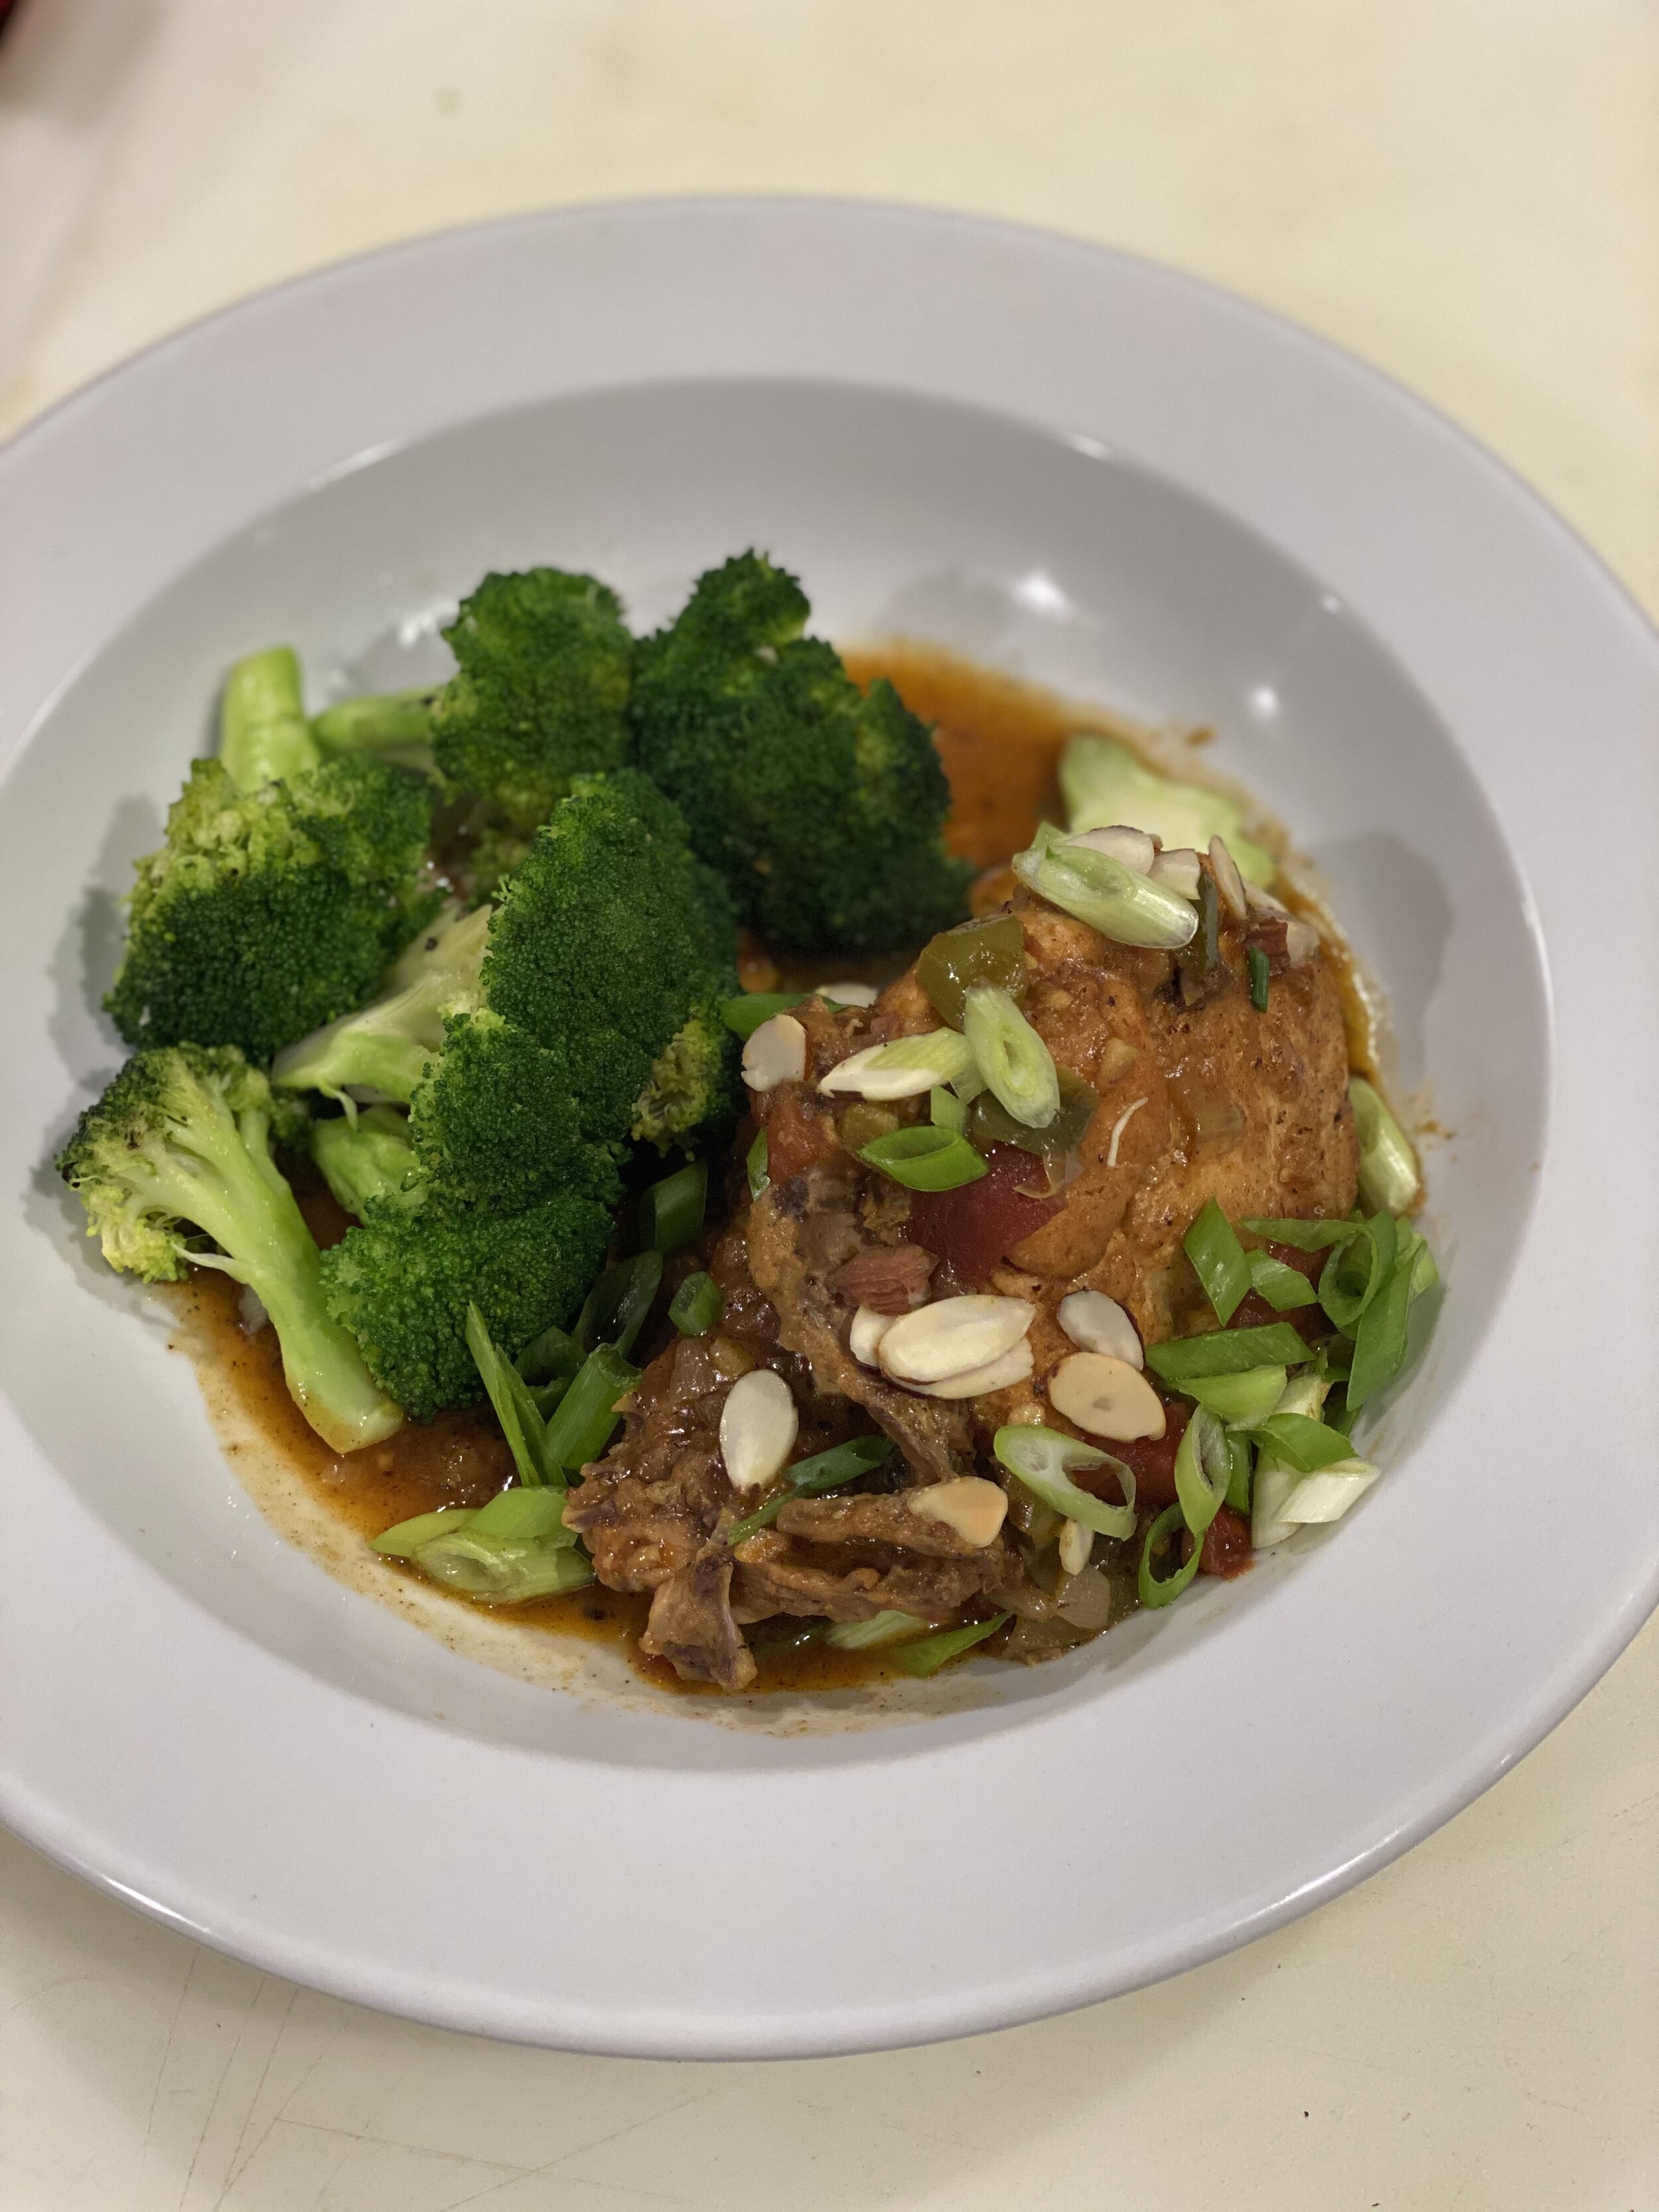 Chef Pearl's finished dish of country braised chicken & browned broccoli, sess. 5.jpeg